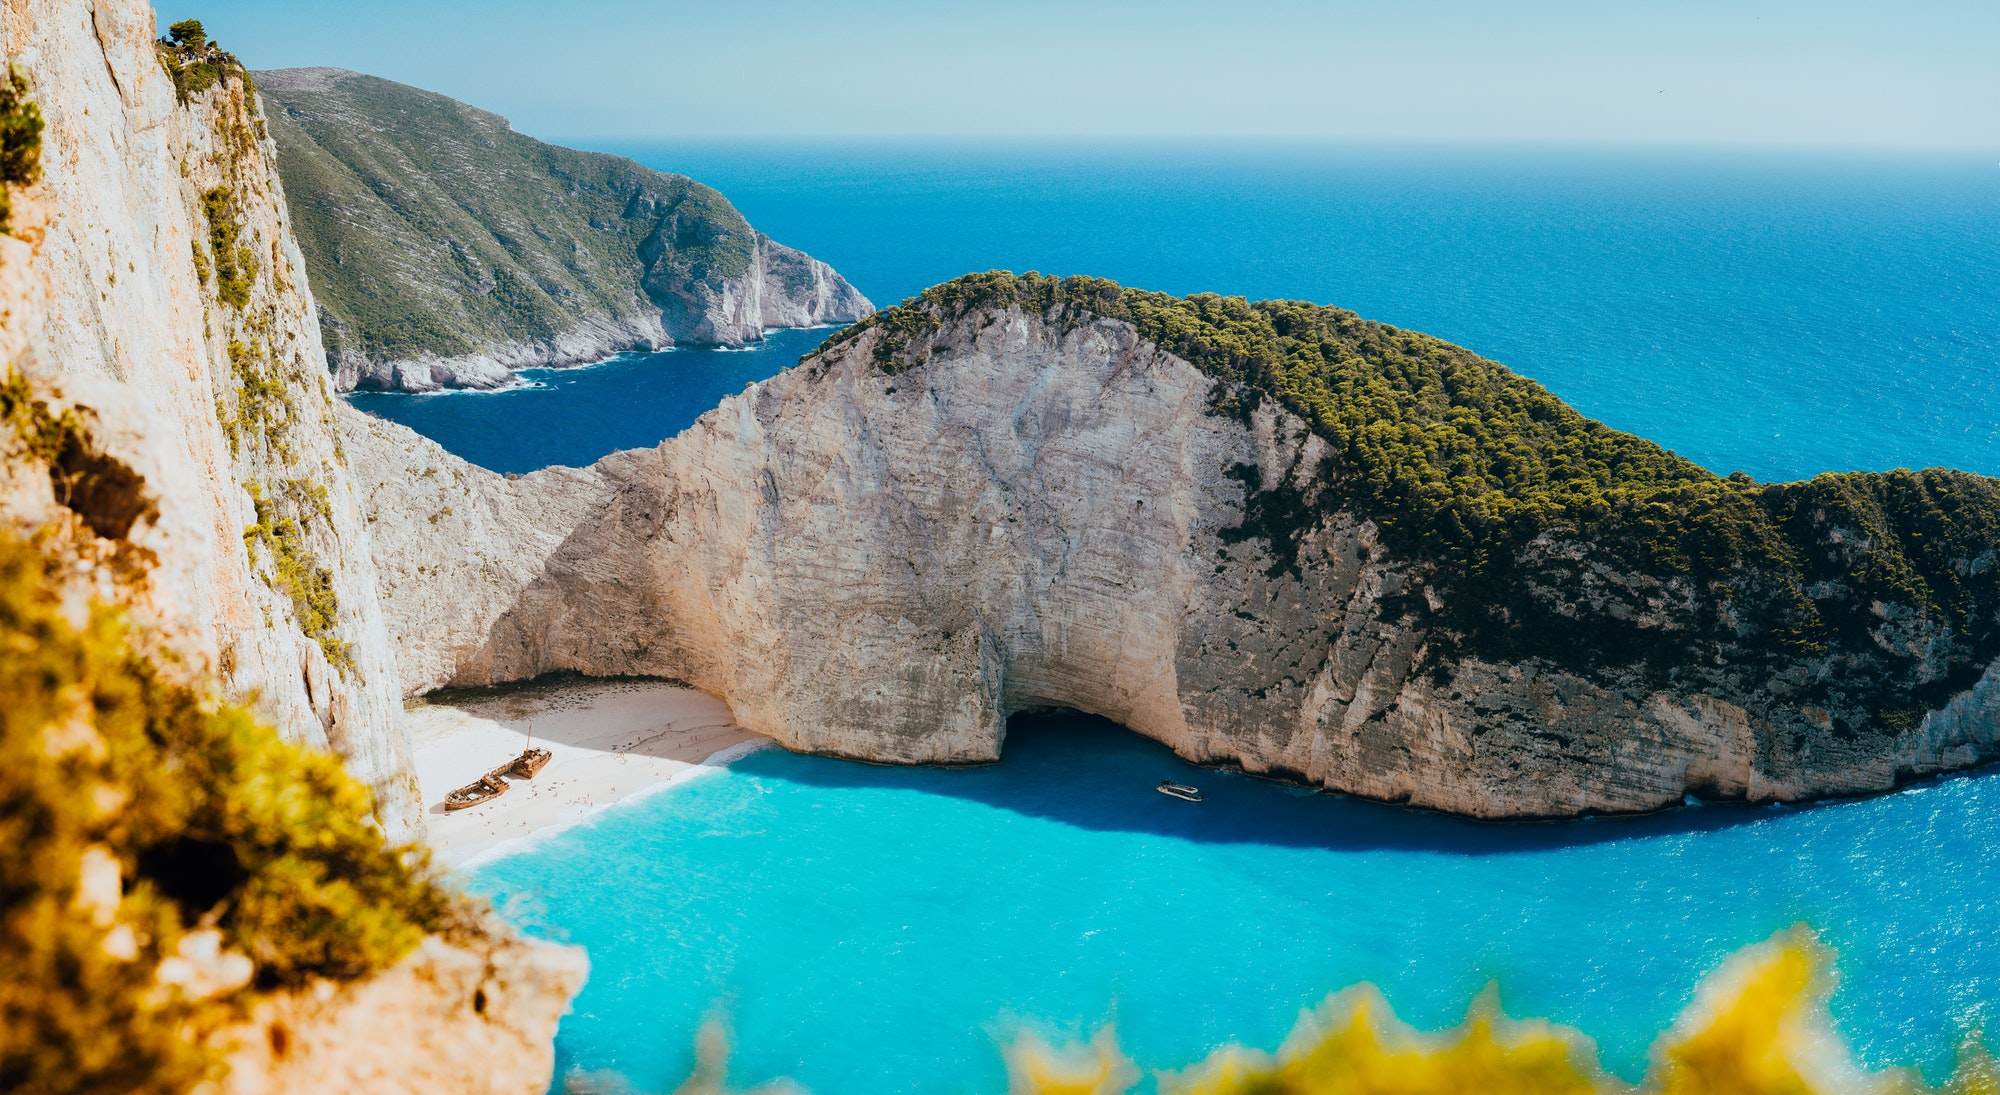 Panoramic view of Navagio beach, Zakynthos island, Greece. Shipwreck bay with turquoise water and